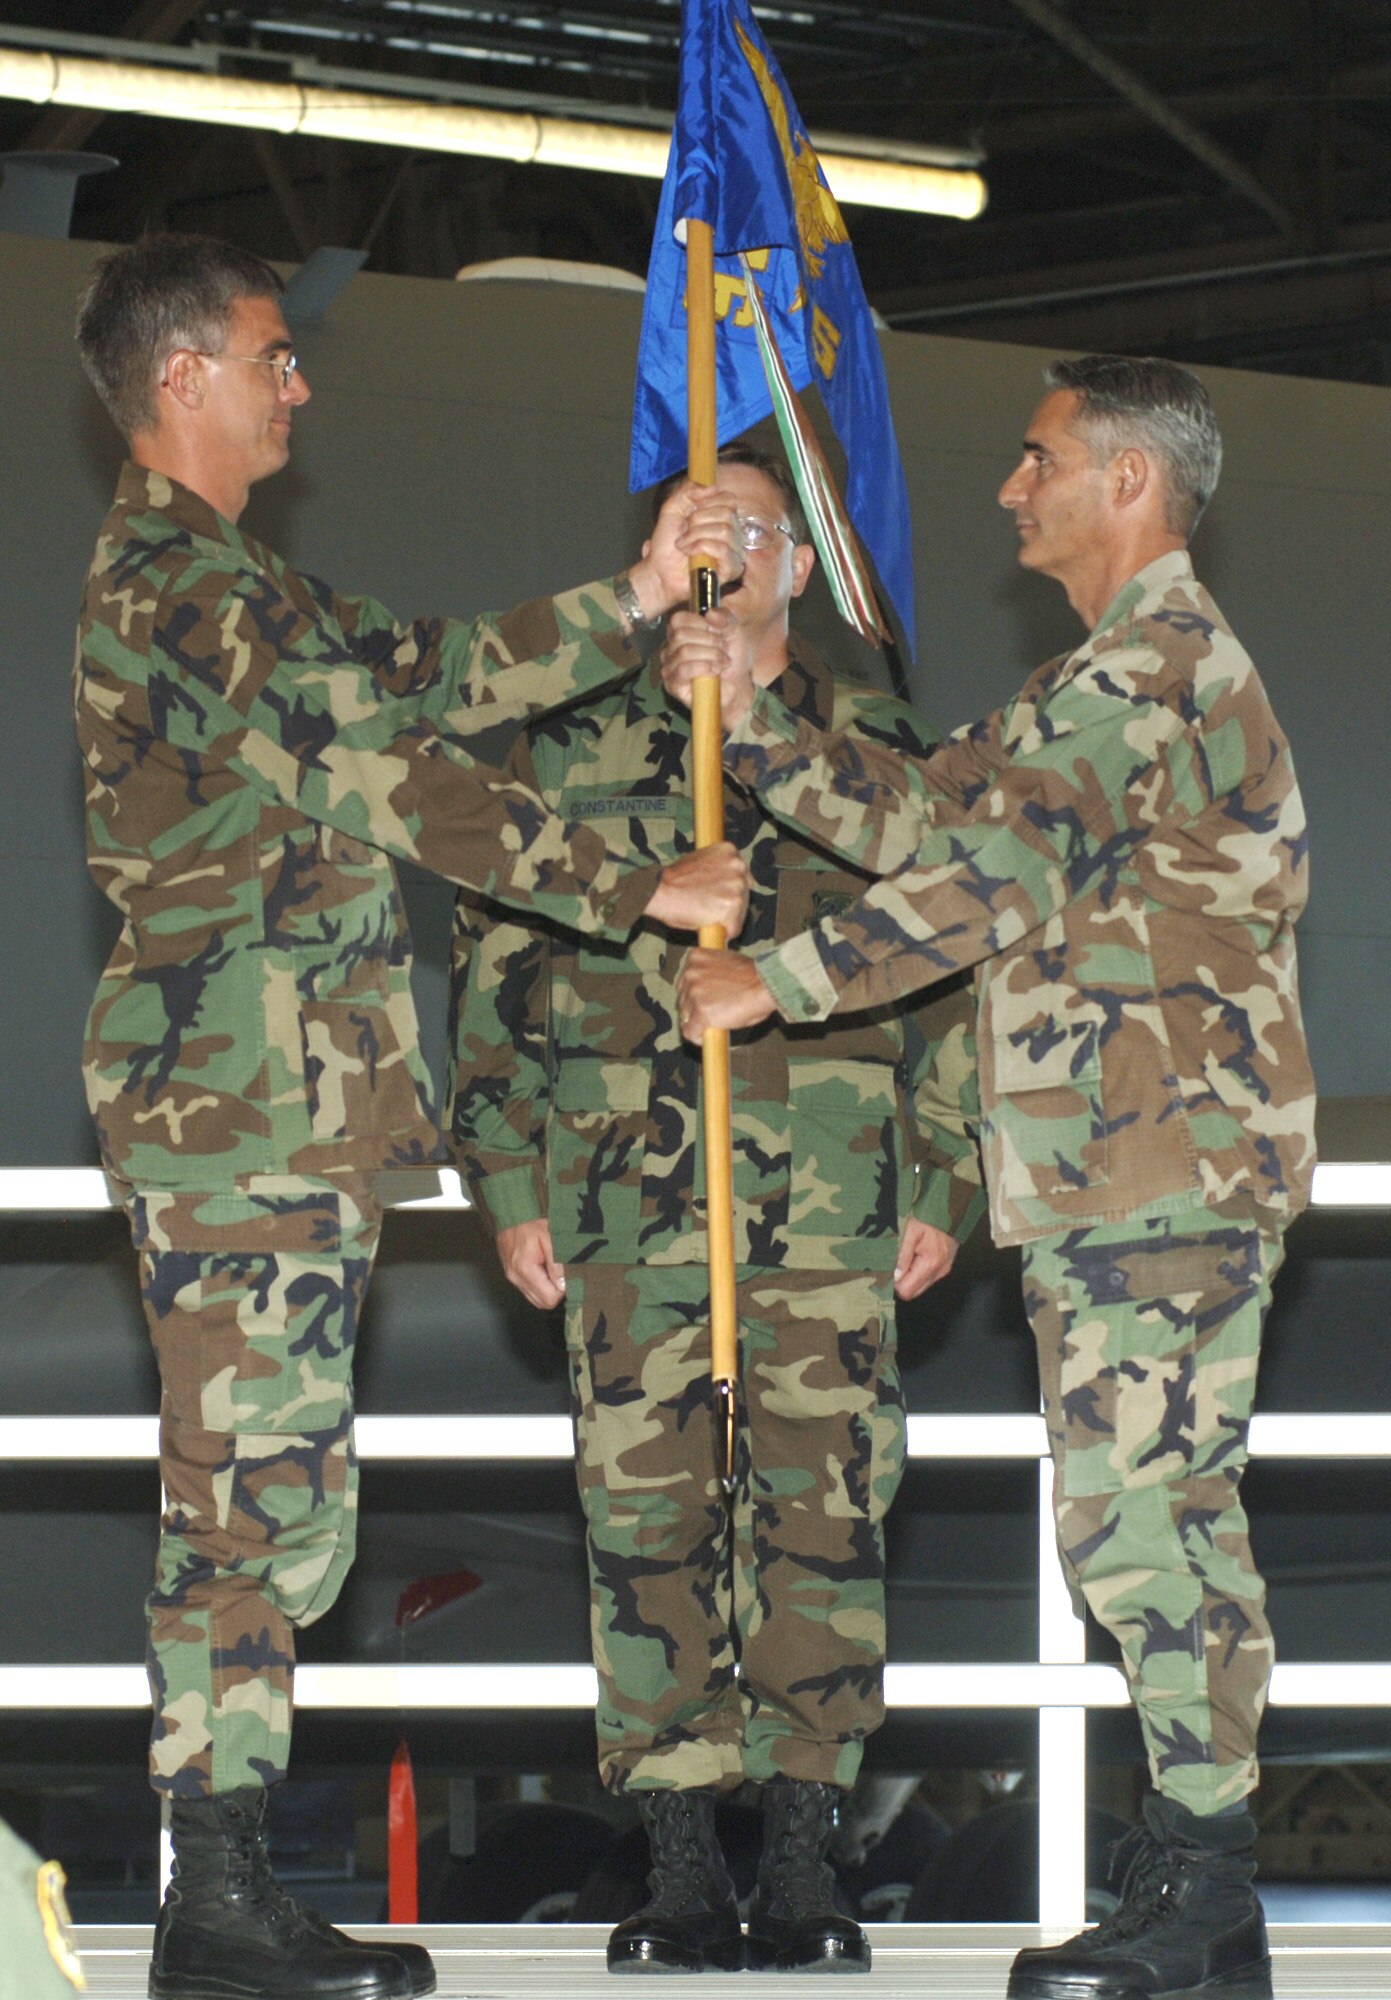 FAIRCHILD AIR FORCE BASE, Wash. – Col. Robert Egbert (left), 92nd Maintenance Group commander, officiates the change of command ceremony for Maj. Carl Hutcherson, new commander of the 92nd Maintenance Operations Squadron. Major Hutcherson comes to Fairchild from Wright Patterson Air Force Base, Ohio, where he recently received a Master of Logistics Management from the Air Force Institute of Technlogy. (U.S. Air Force photo/ Senior Airman Chad Watkins) 